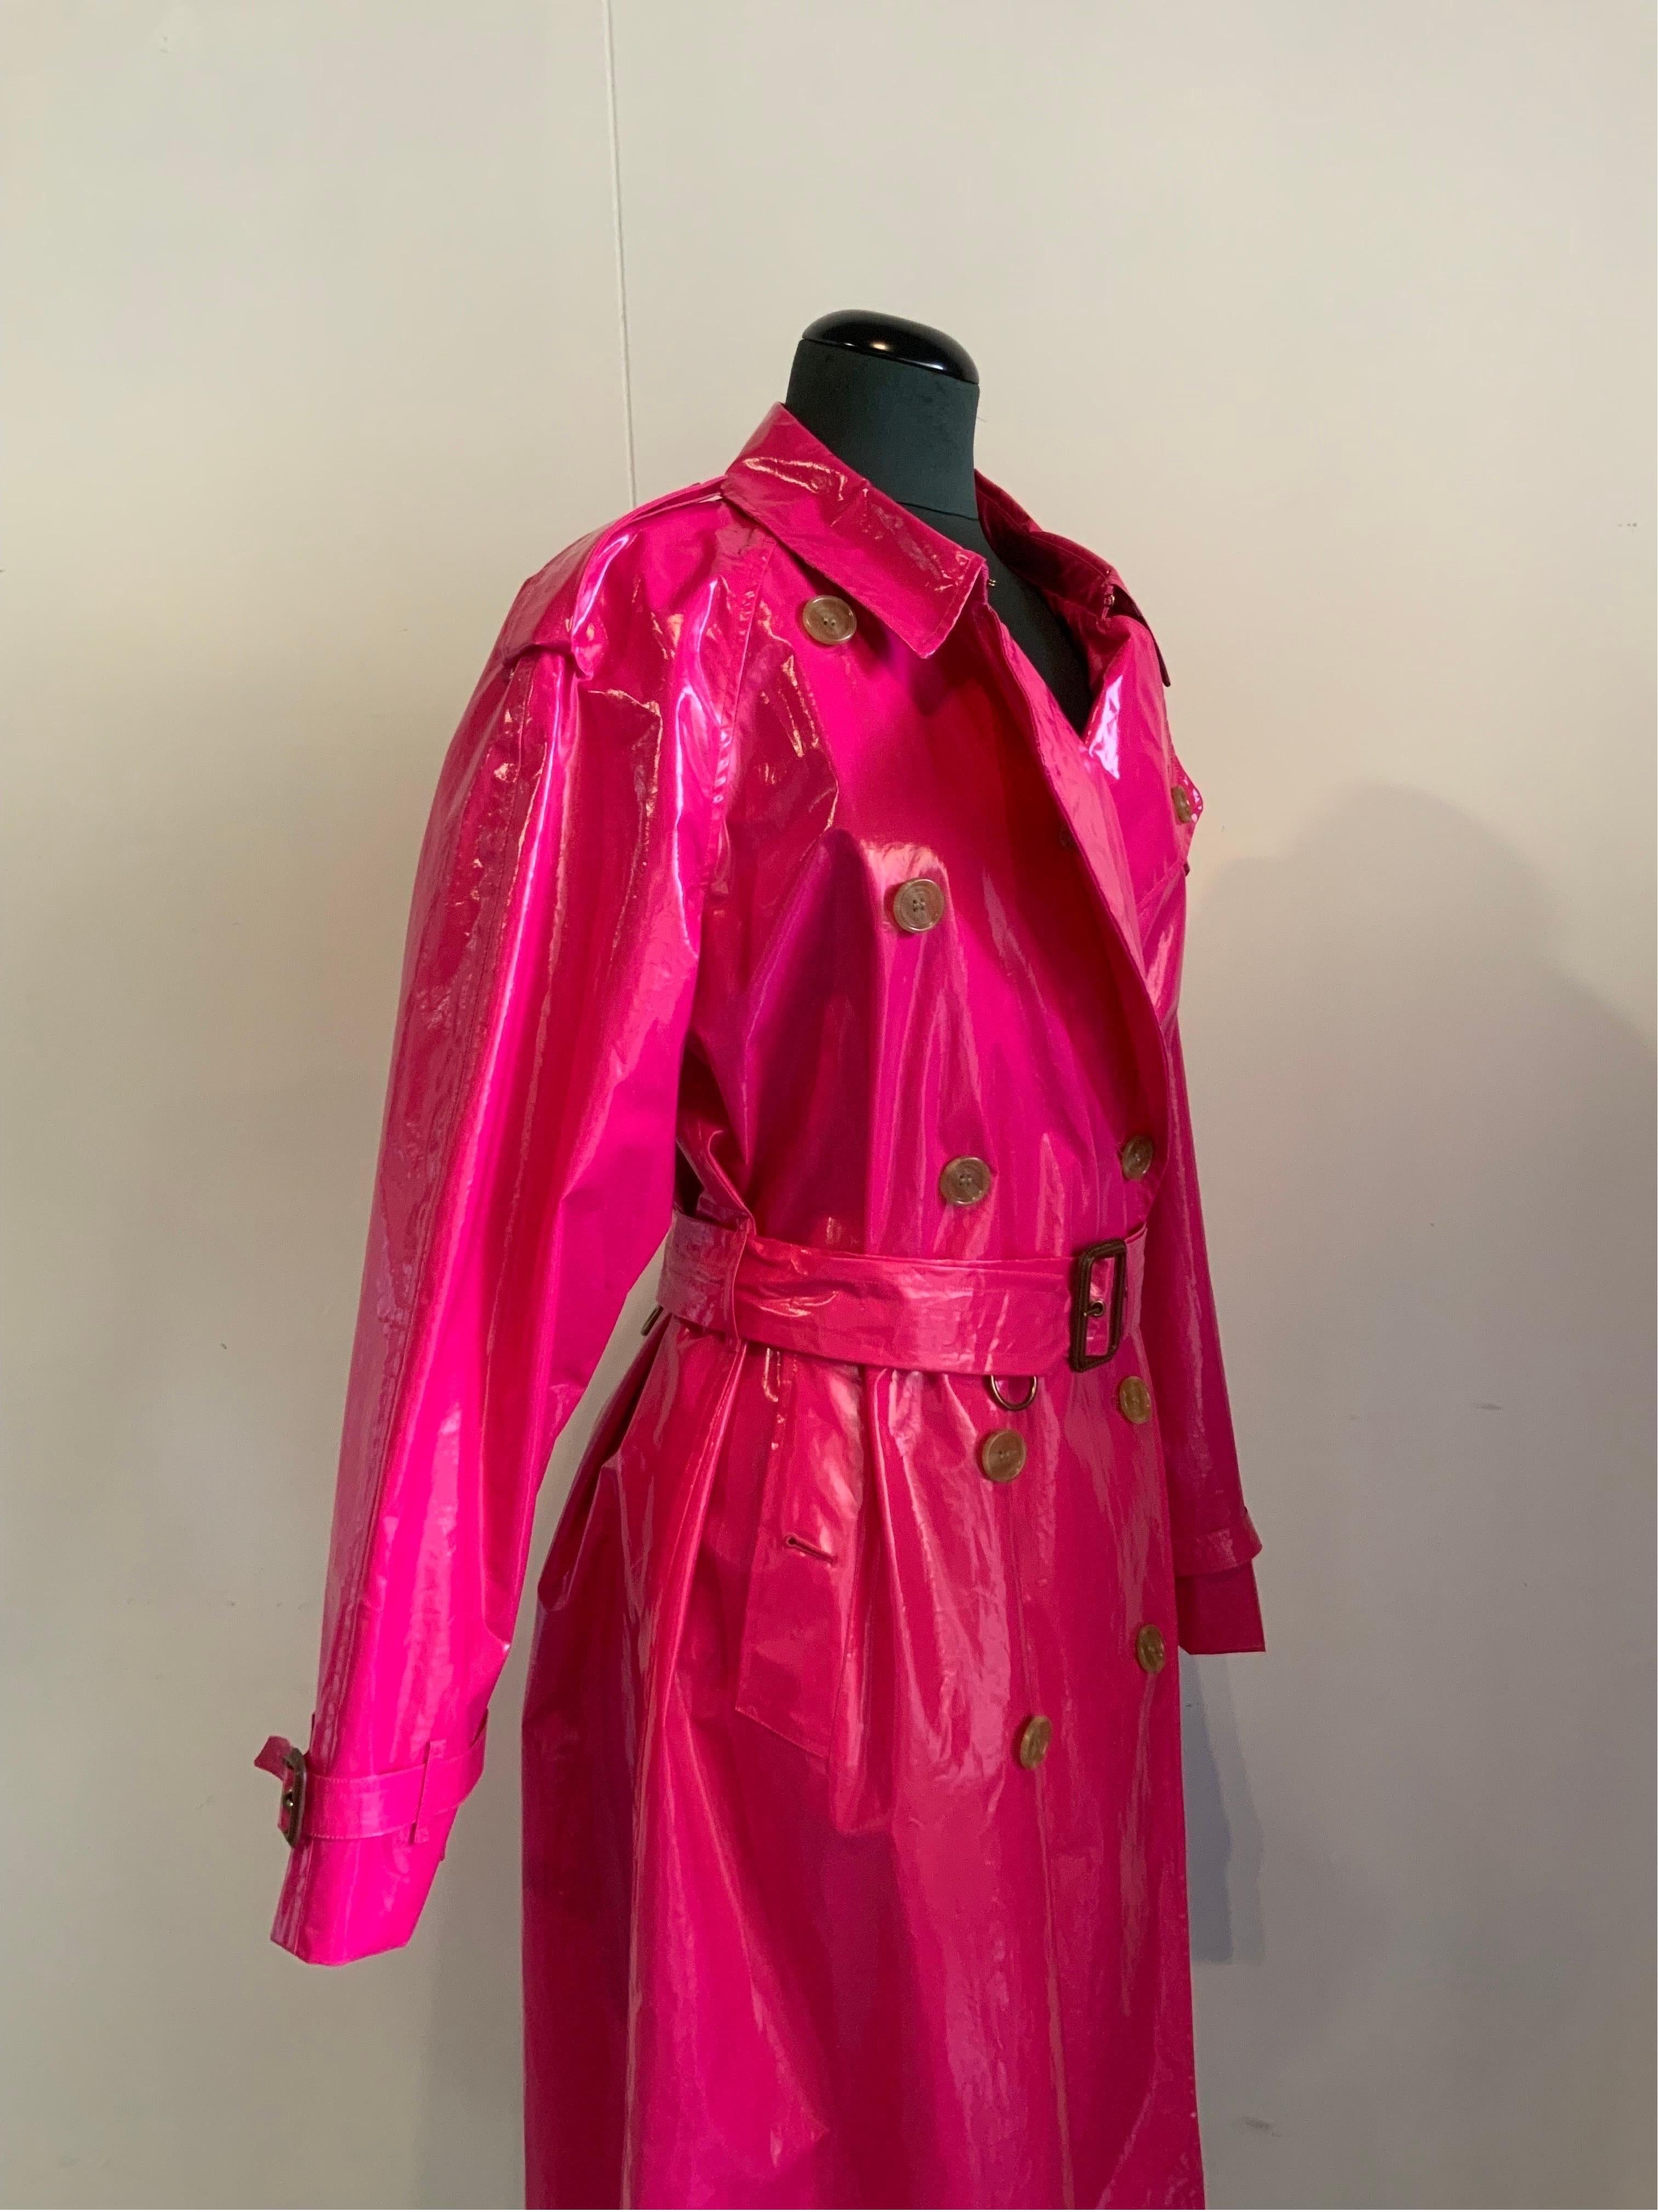 BURBERRY FUCHSIA TRENCH COAT.
Made of 100% cotton. Lining with the iconic print symbol of the brand.
Italian size 44.
Shoulders 44 cm
Bust 58 cm
Length 123 cm
Sleeve 70 cm
Excellent general condition, like new.